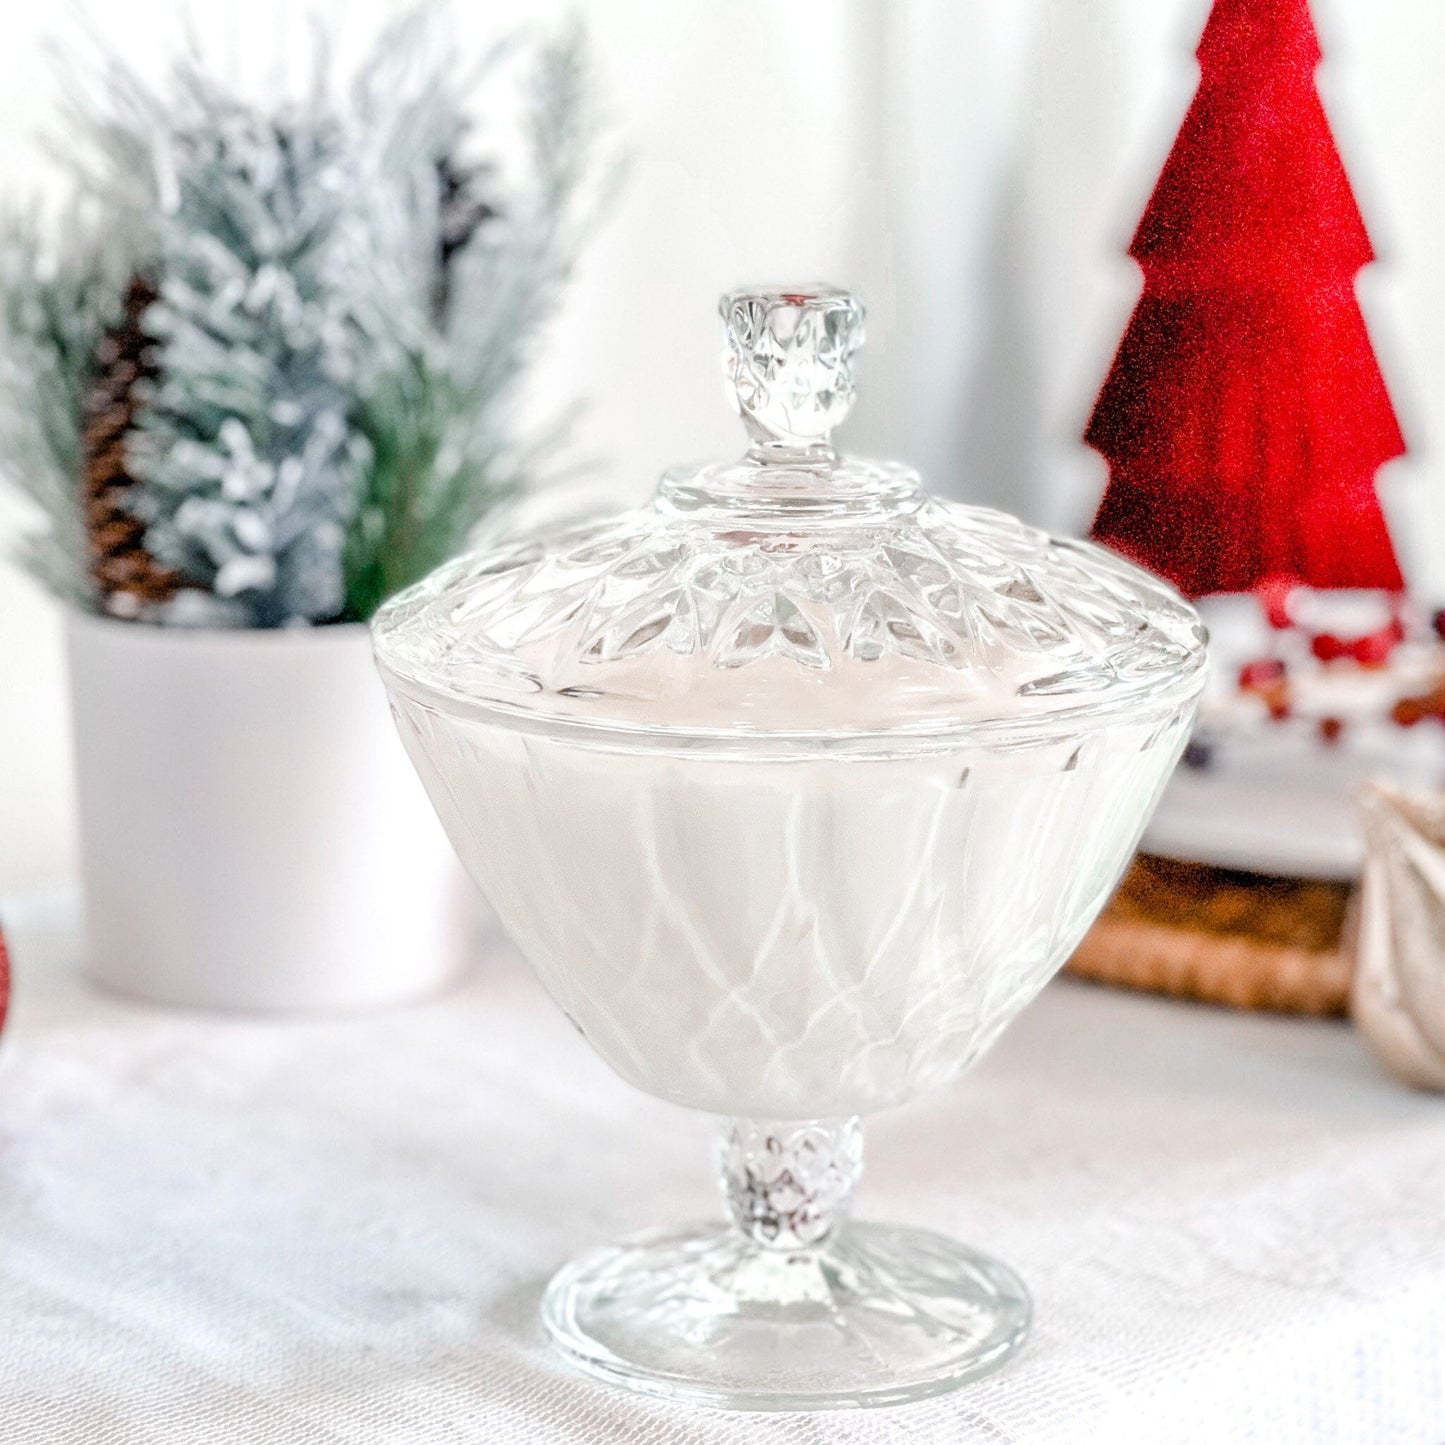 Hand Poured Lavender Vanilla Candle in Vintage Candy Dish